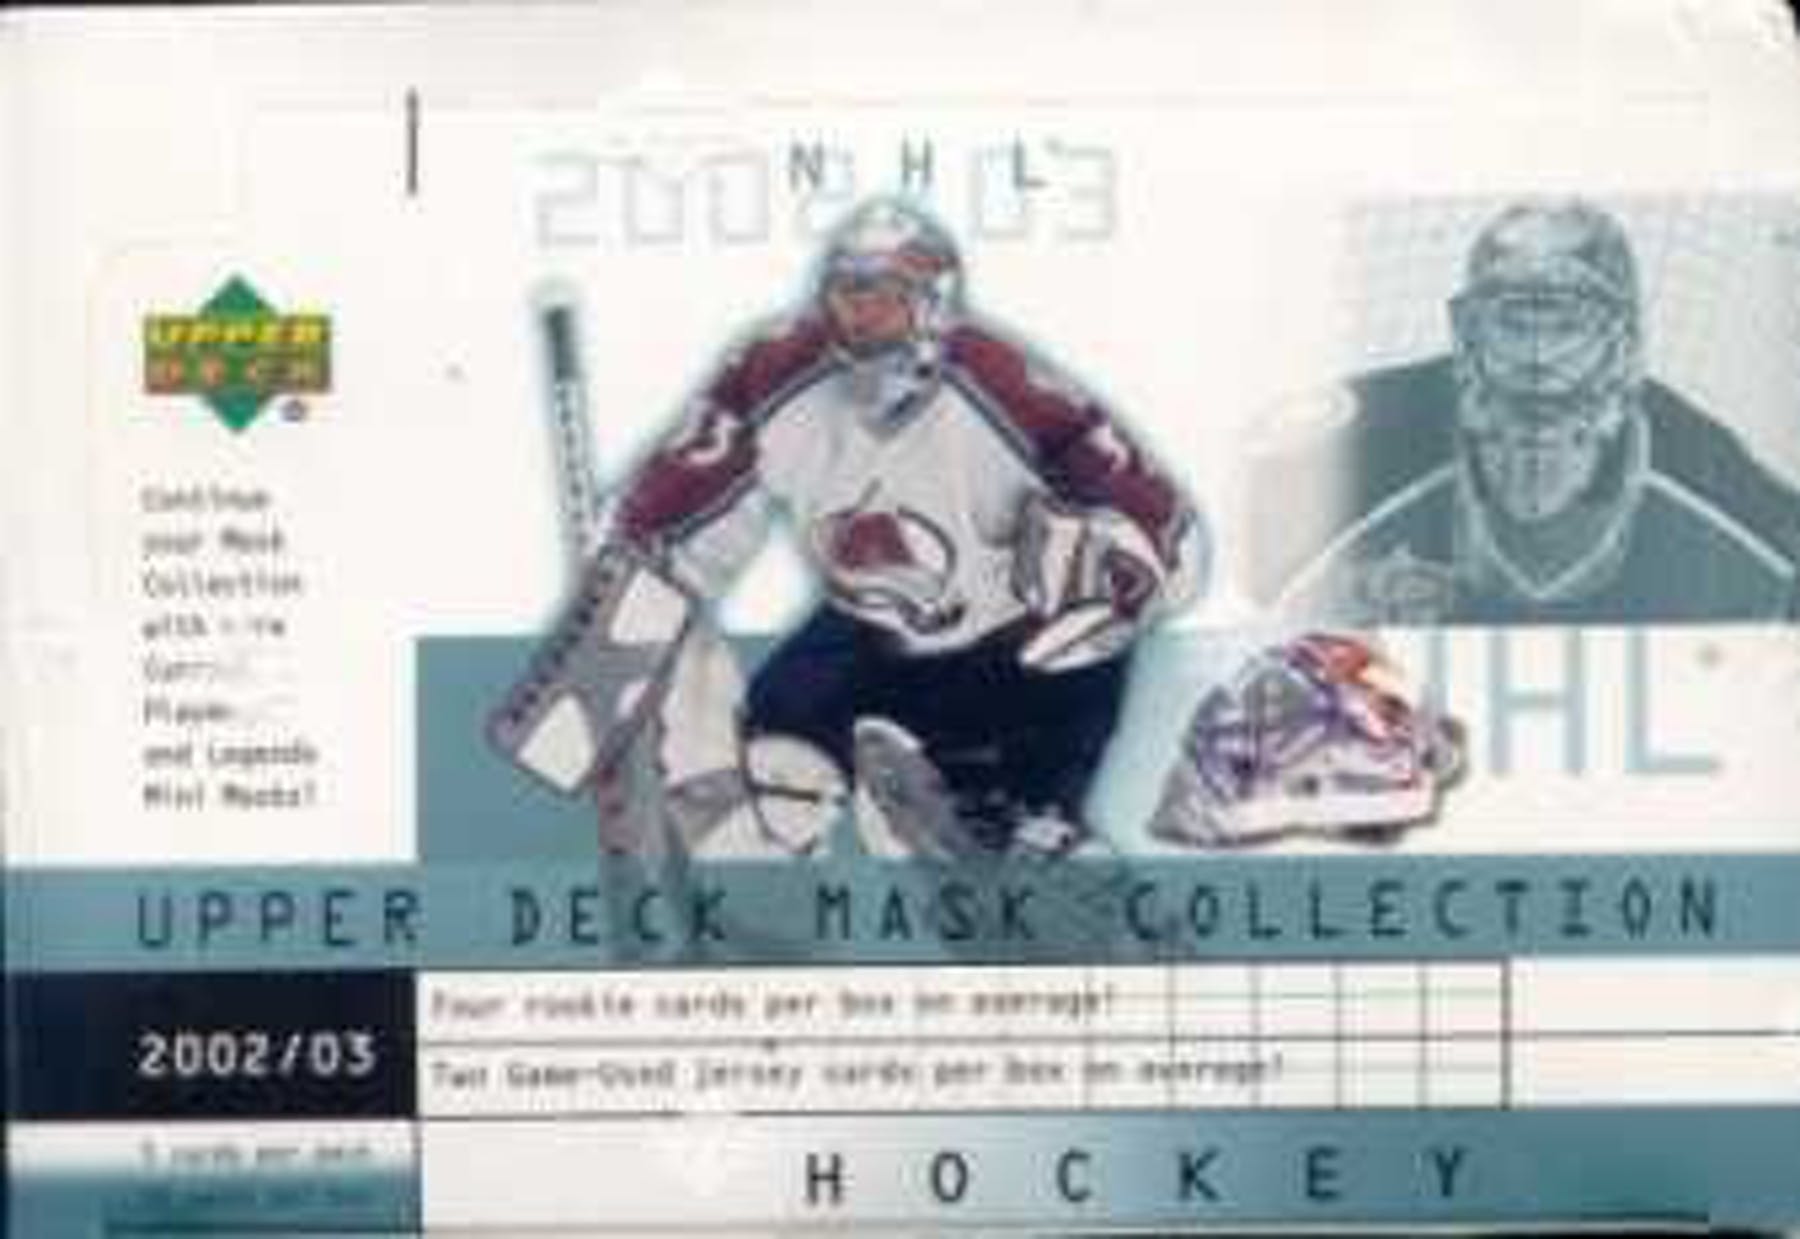 2002-03 UD Mask Collection #27 Ron Tugnutt/Marty Turco Dallas